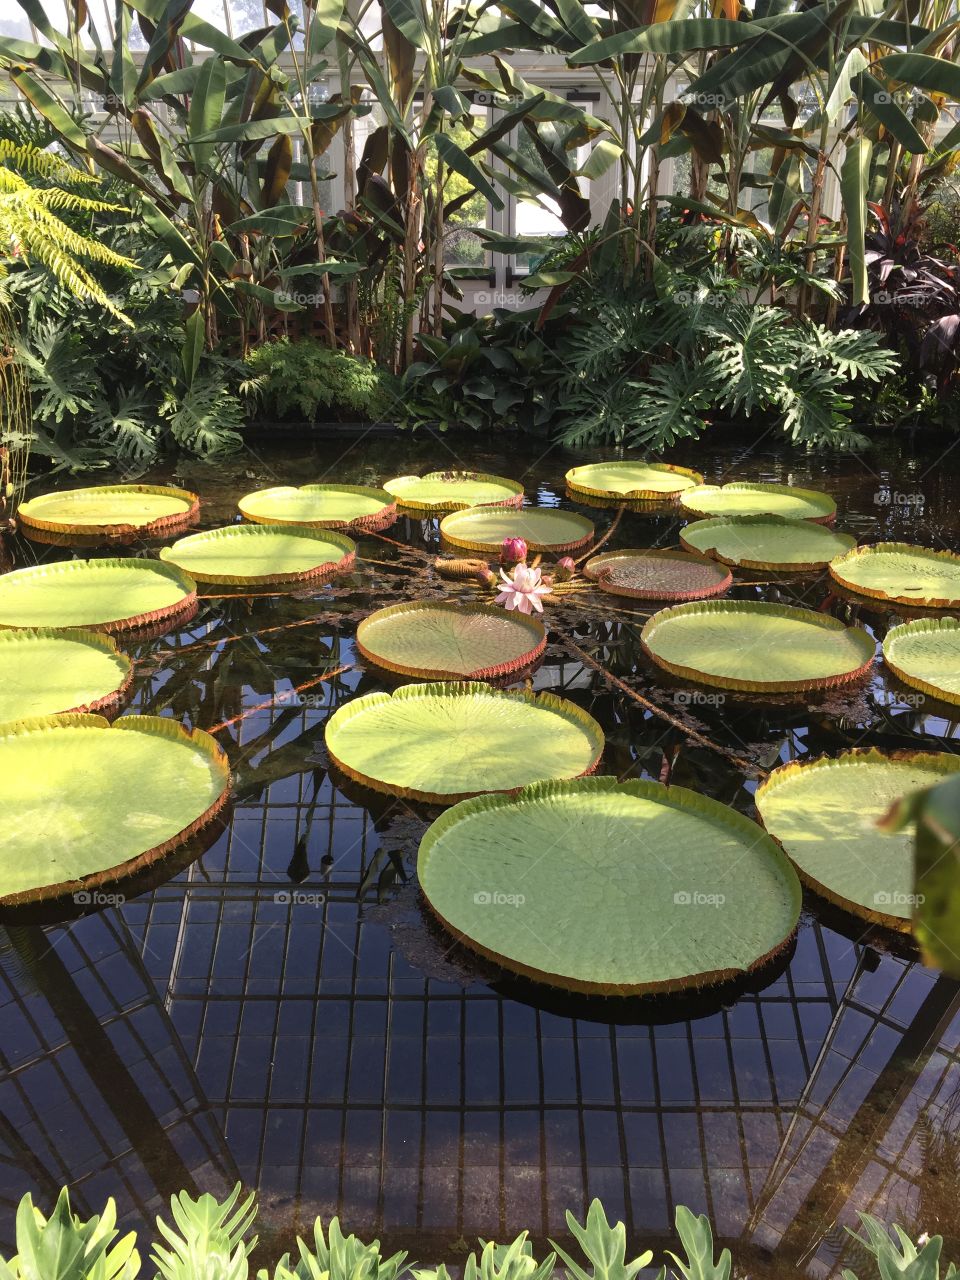 Large Lilly pads at the botanical garden